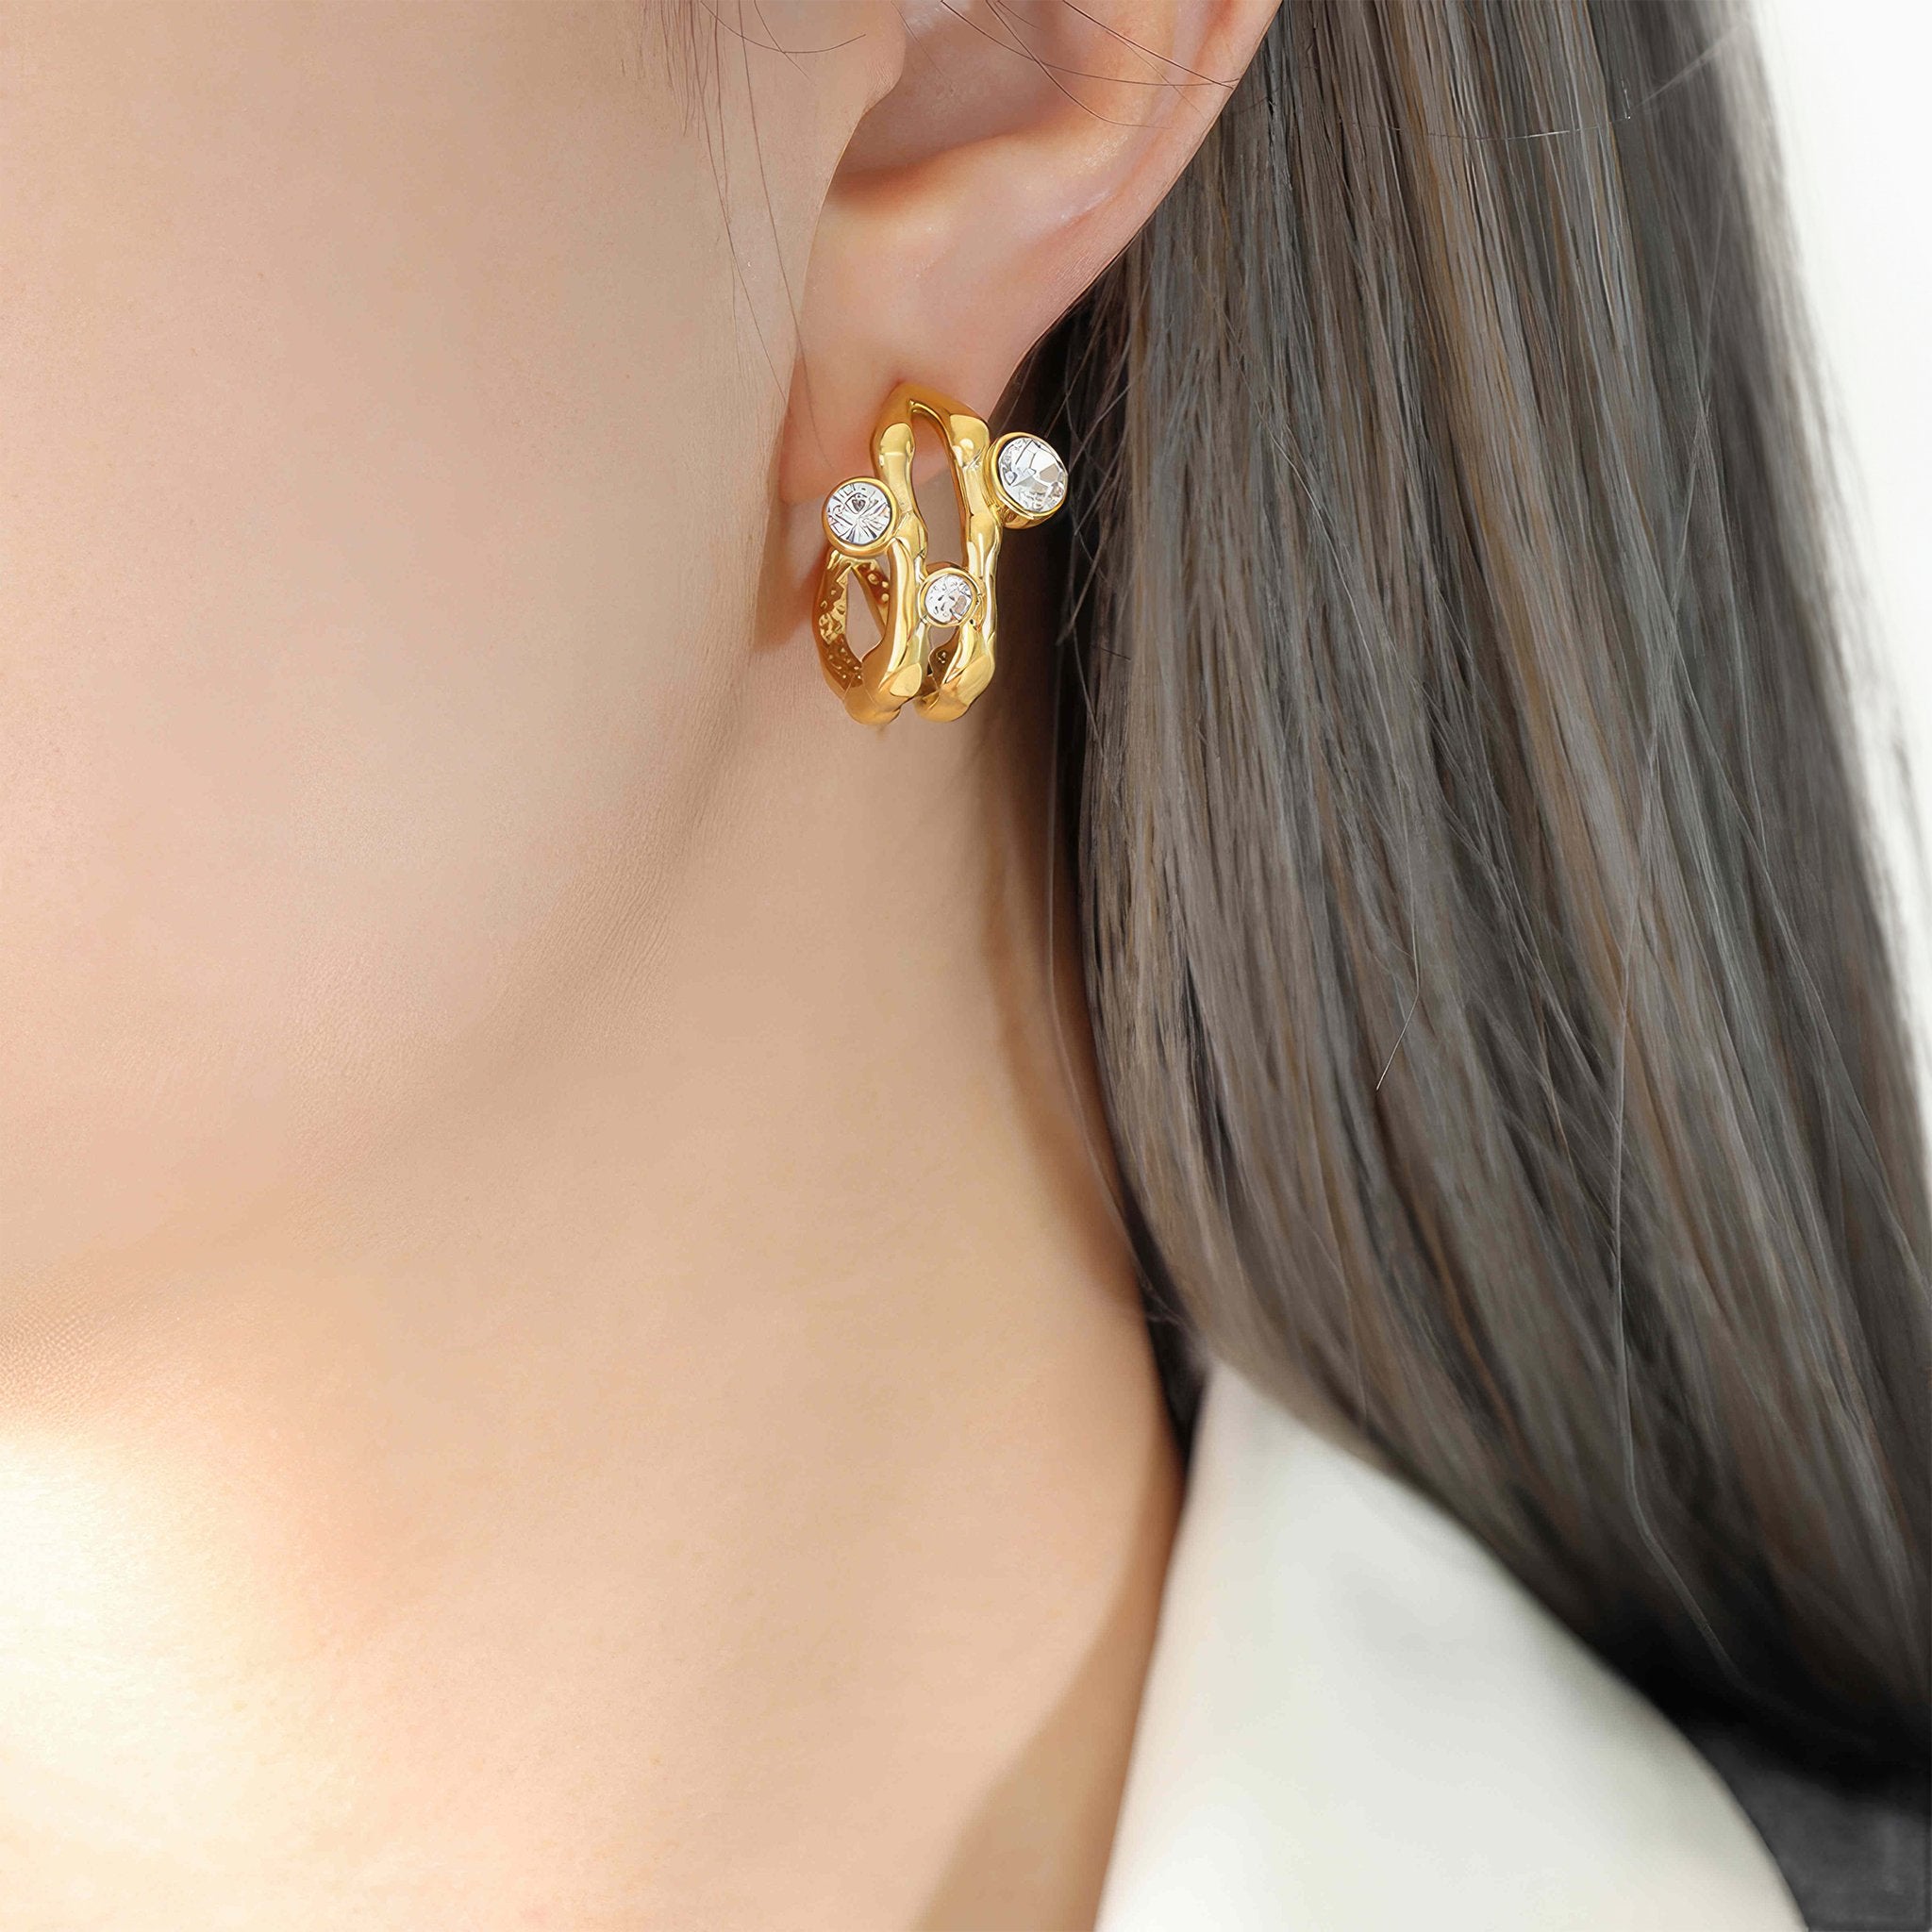 C-Shaped Hollow Minimalist Earrings - Nobbier - Earring - 18K Gold And Titanium PVD Coated Jewelry